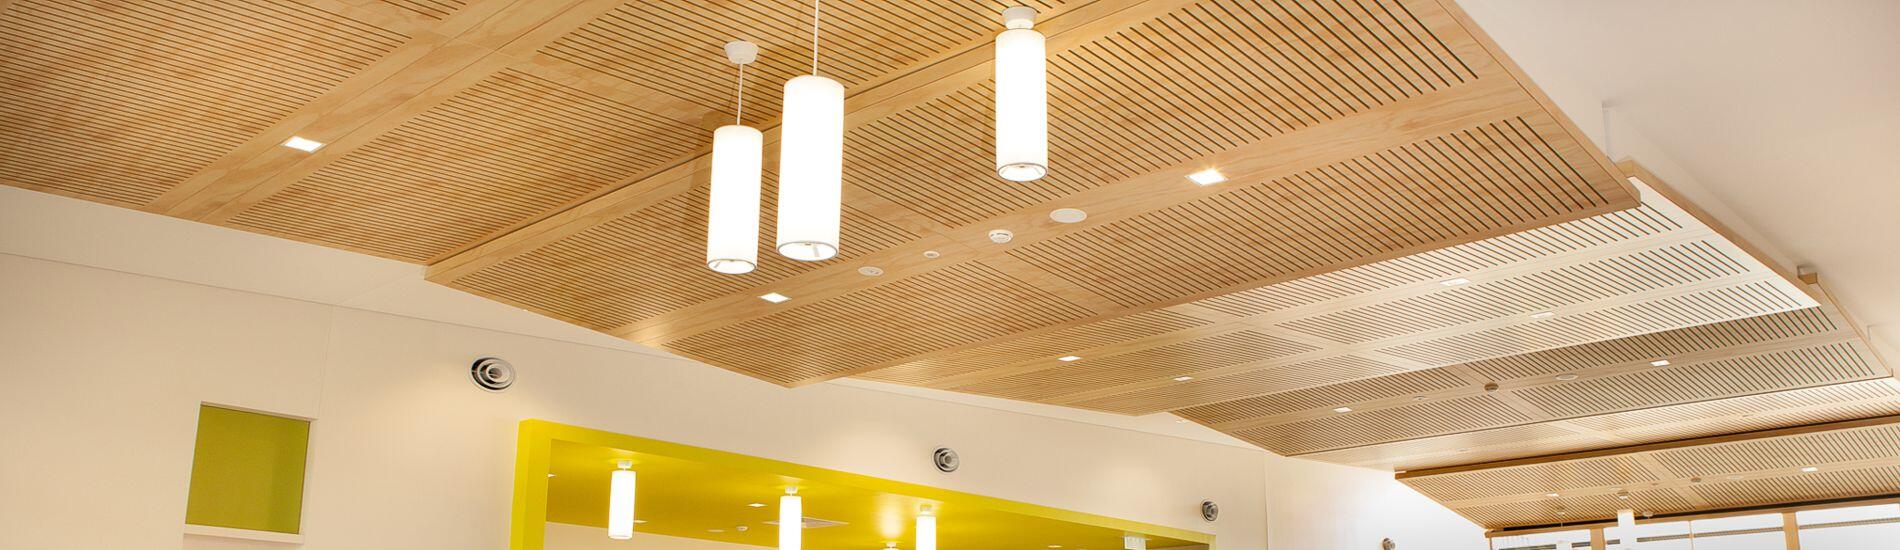 Floating SUPACOUSTIC Acoustic Slotted Panel Ceiling Feature Meets FR Compliance For Uni Reception Area